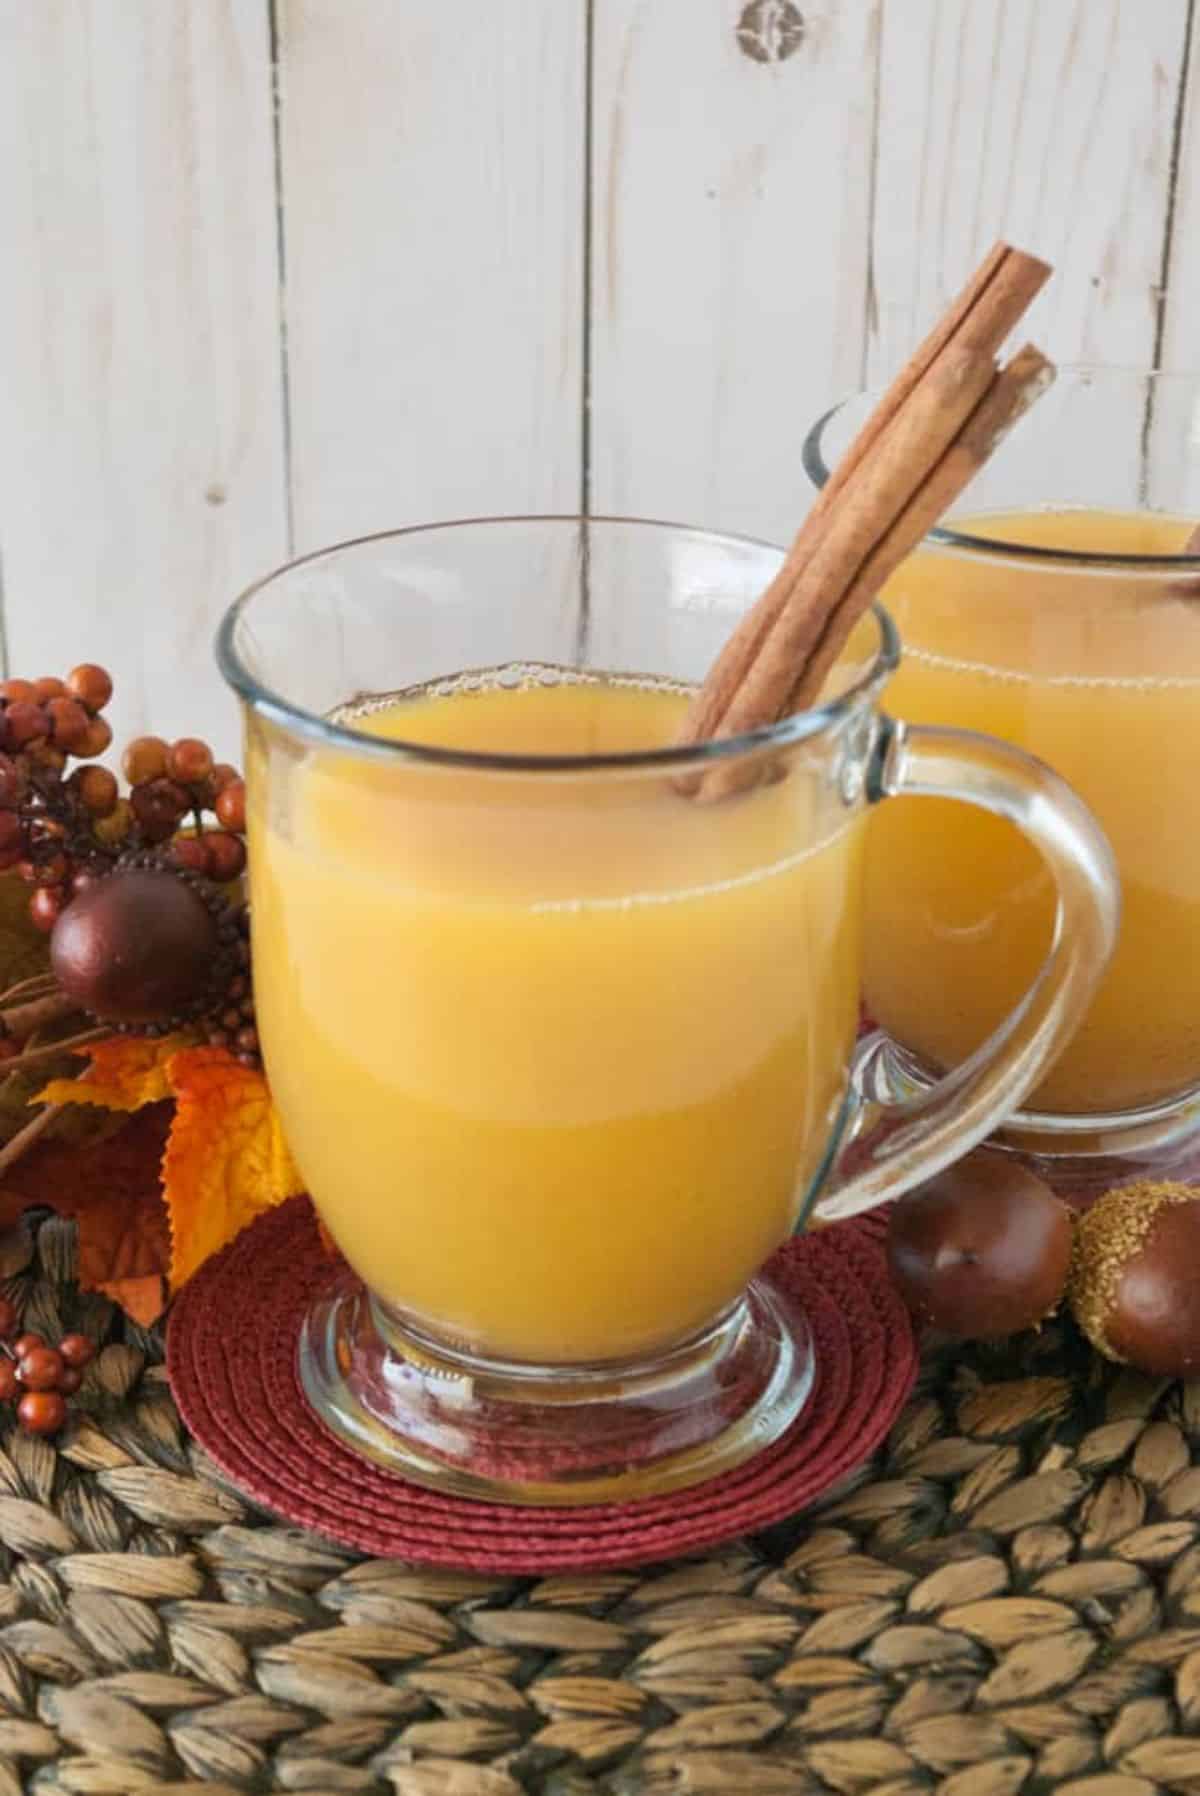 Hot Cider drink in a glass with cinnamon sticks.